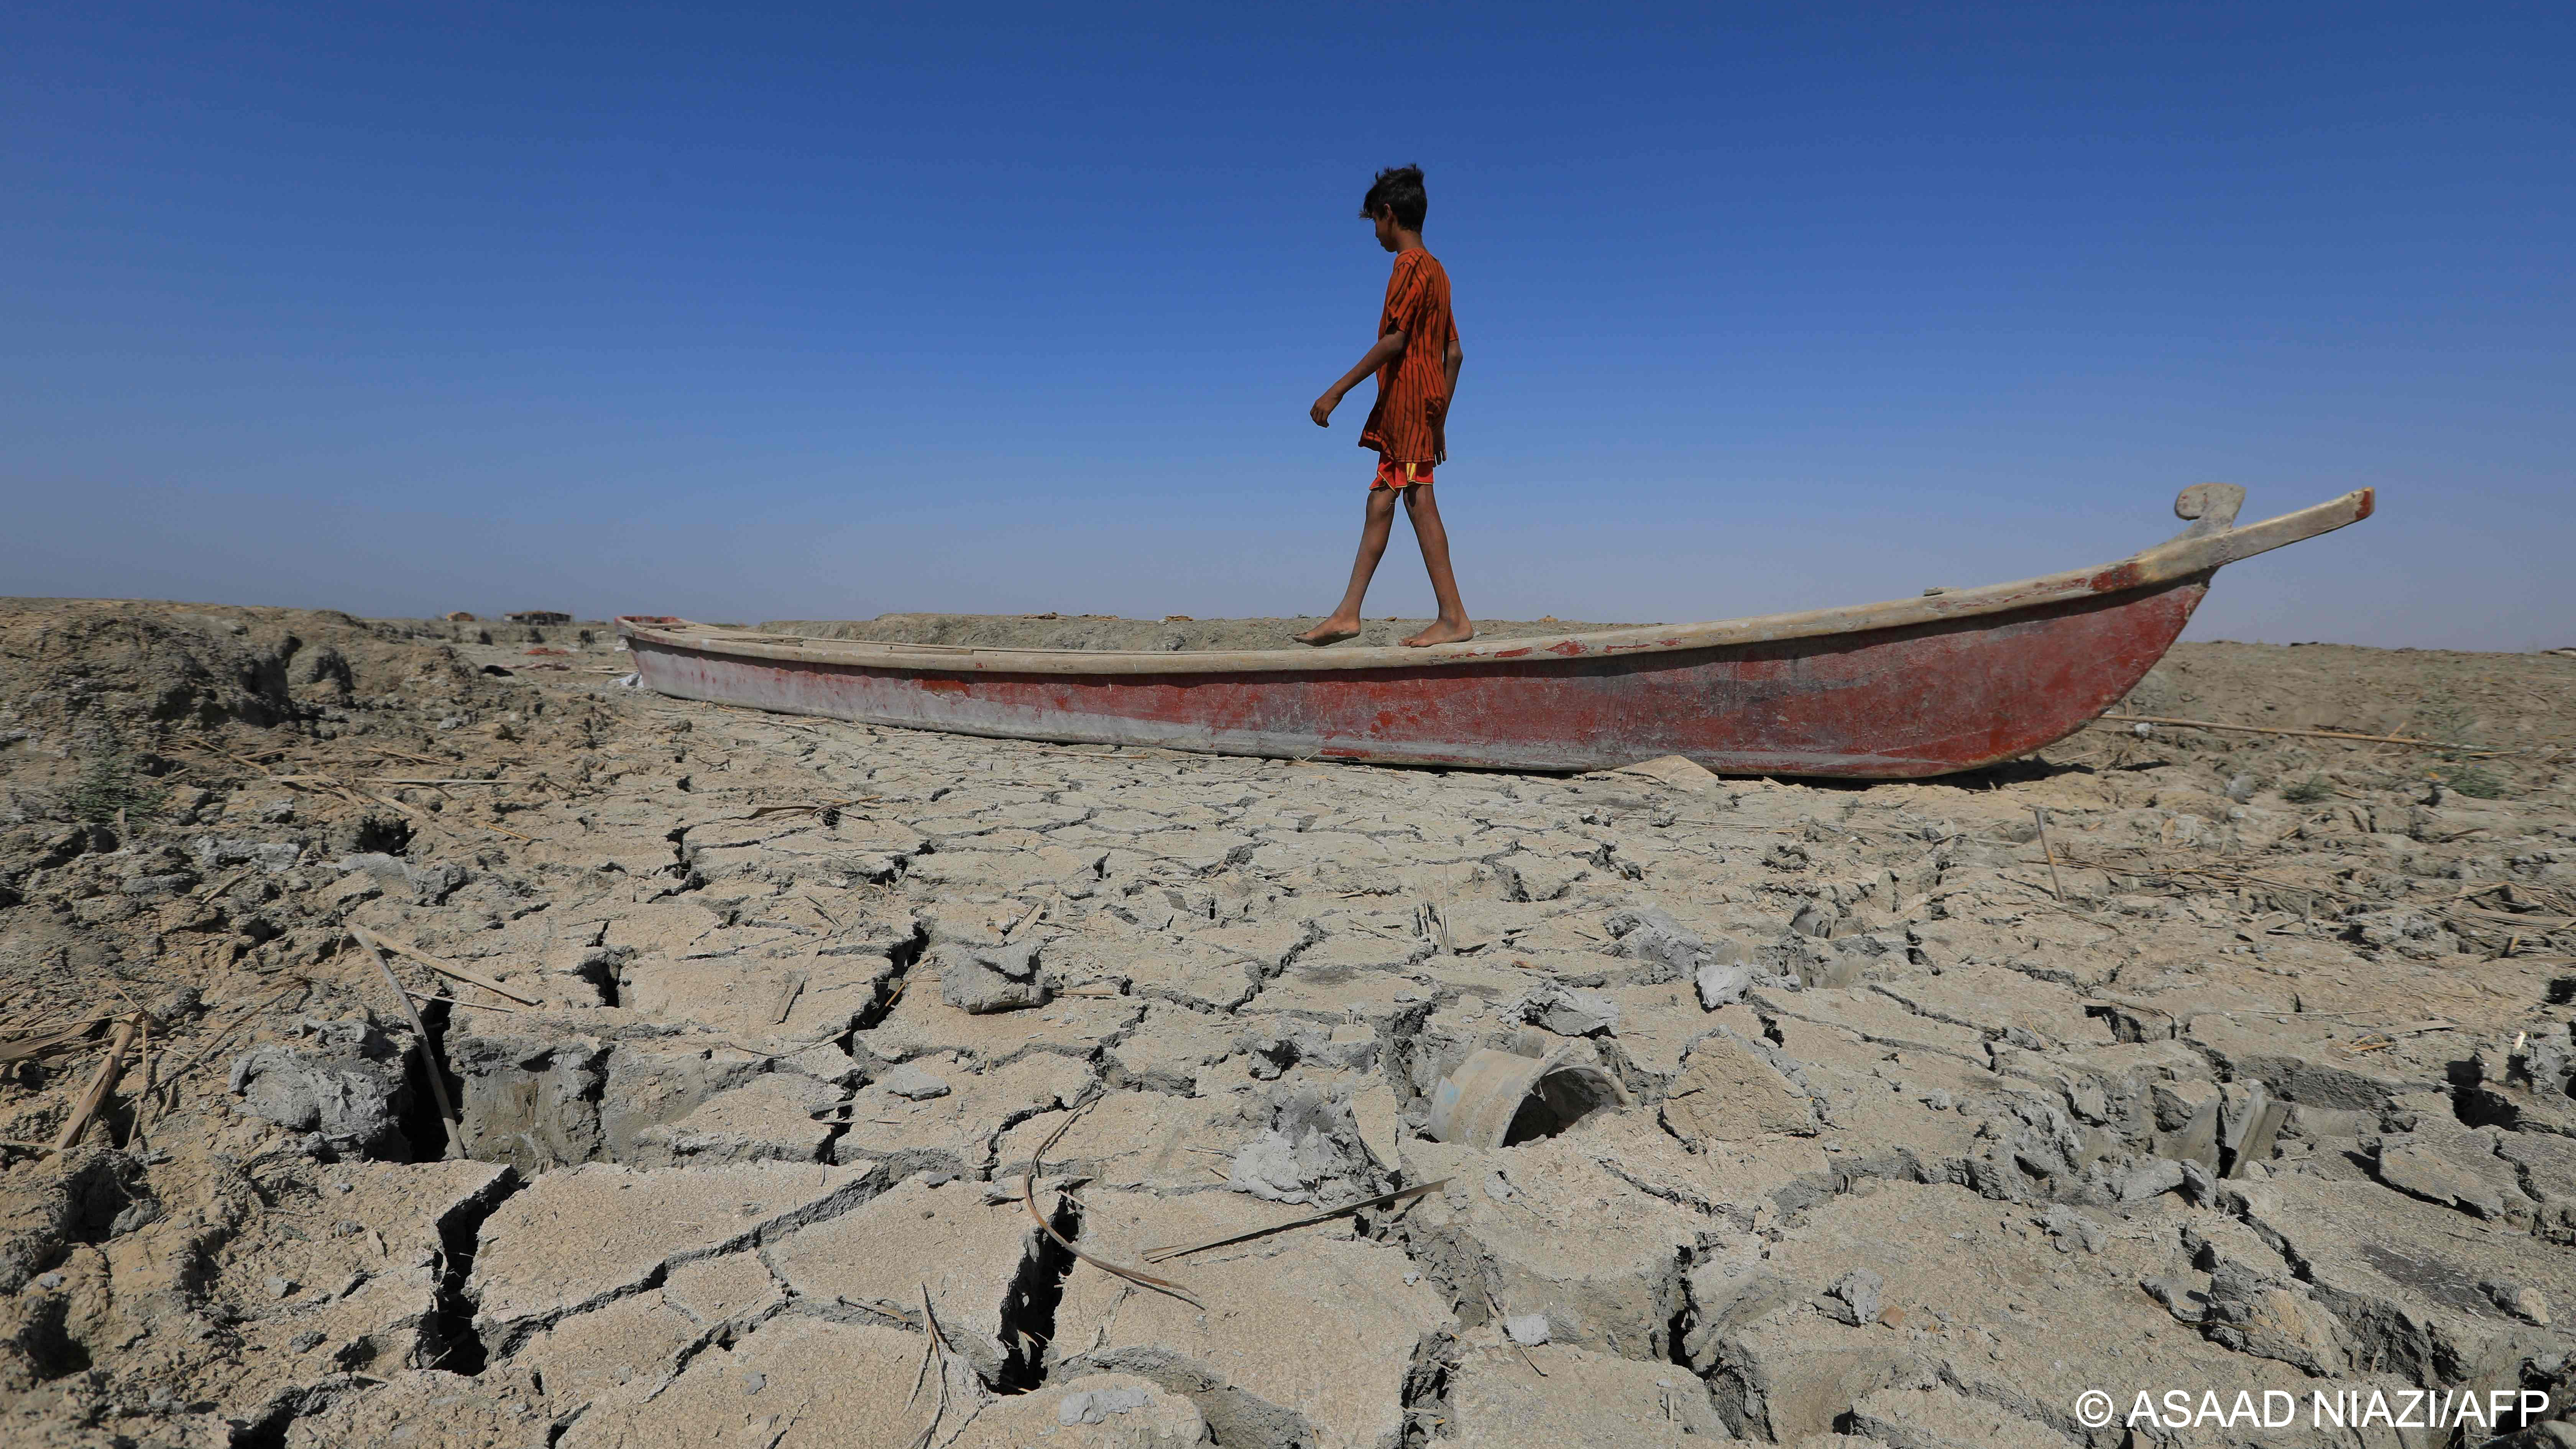 A boy walks on a boat on a dried-up section of the receding southern marshes of  Chibayish, Dhi Qar Governate, southern Iraq (photo: Asaad Niazi/AFP)